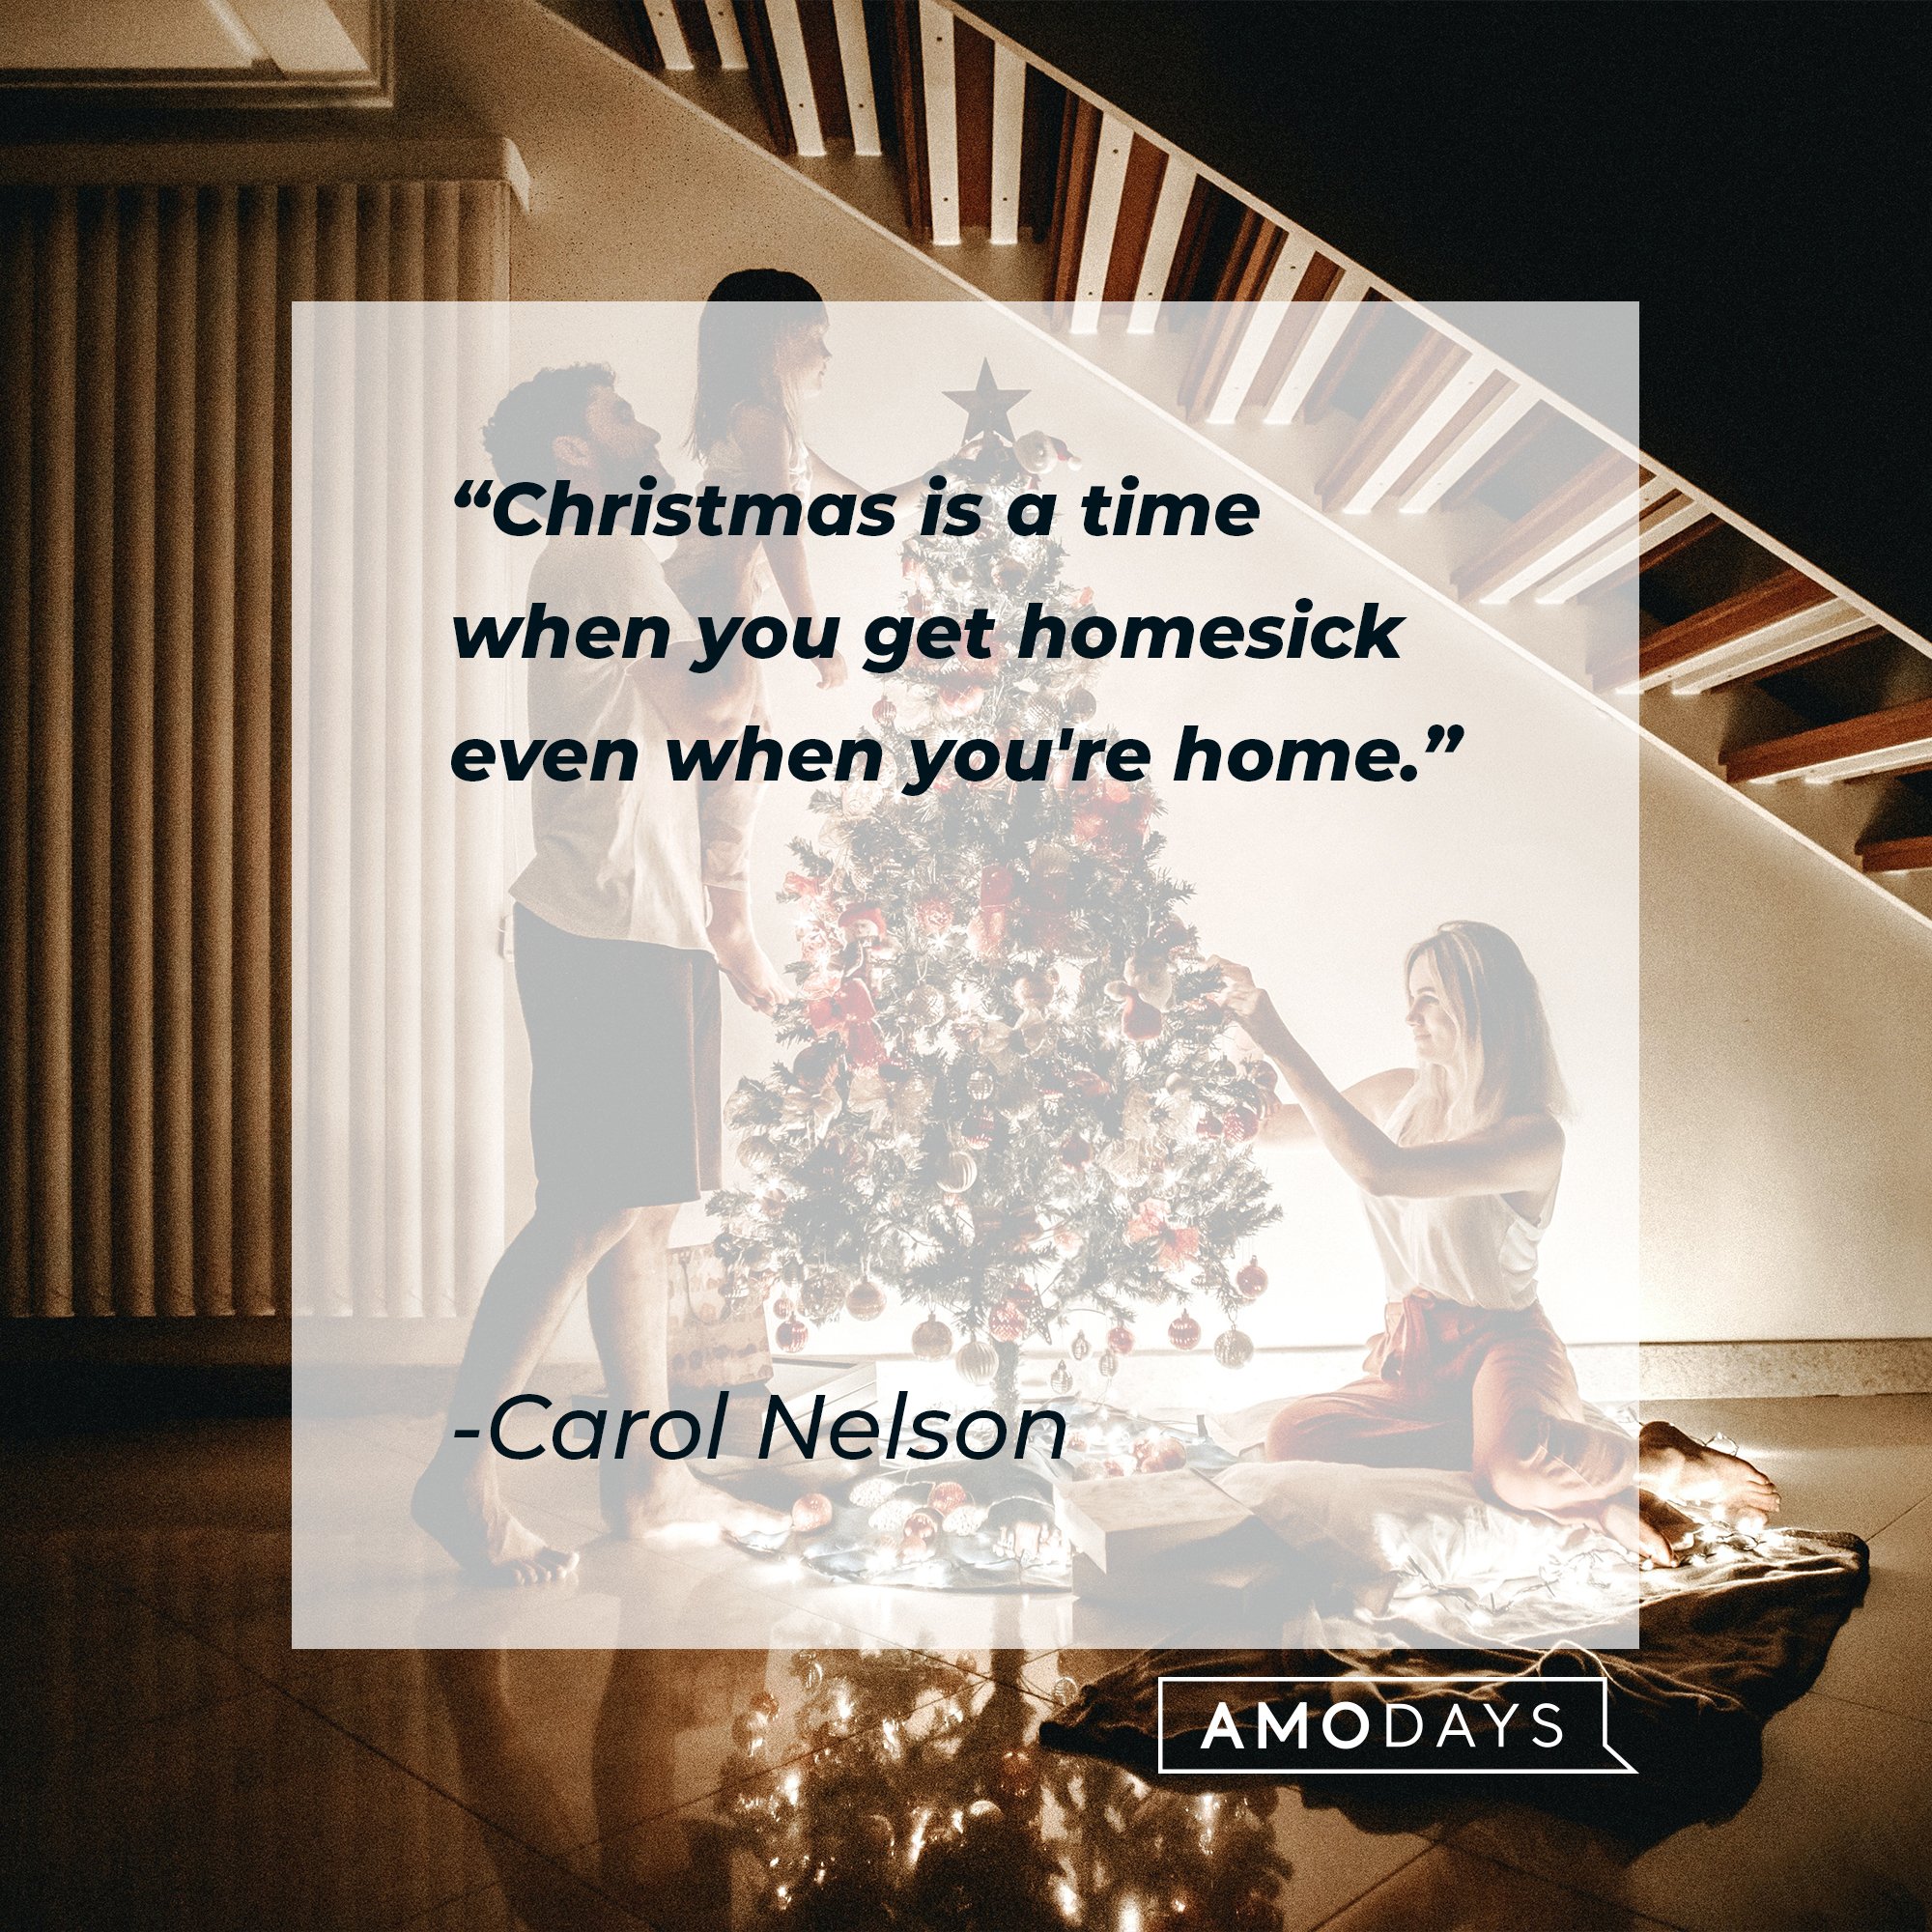 Carol Nelson's quote: "Christmas is a time when you get homesick even when you're home." | Image: AmoDays